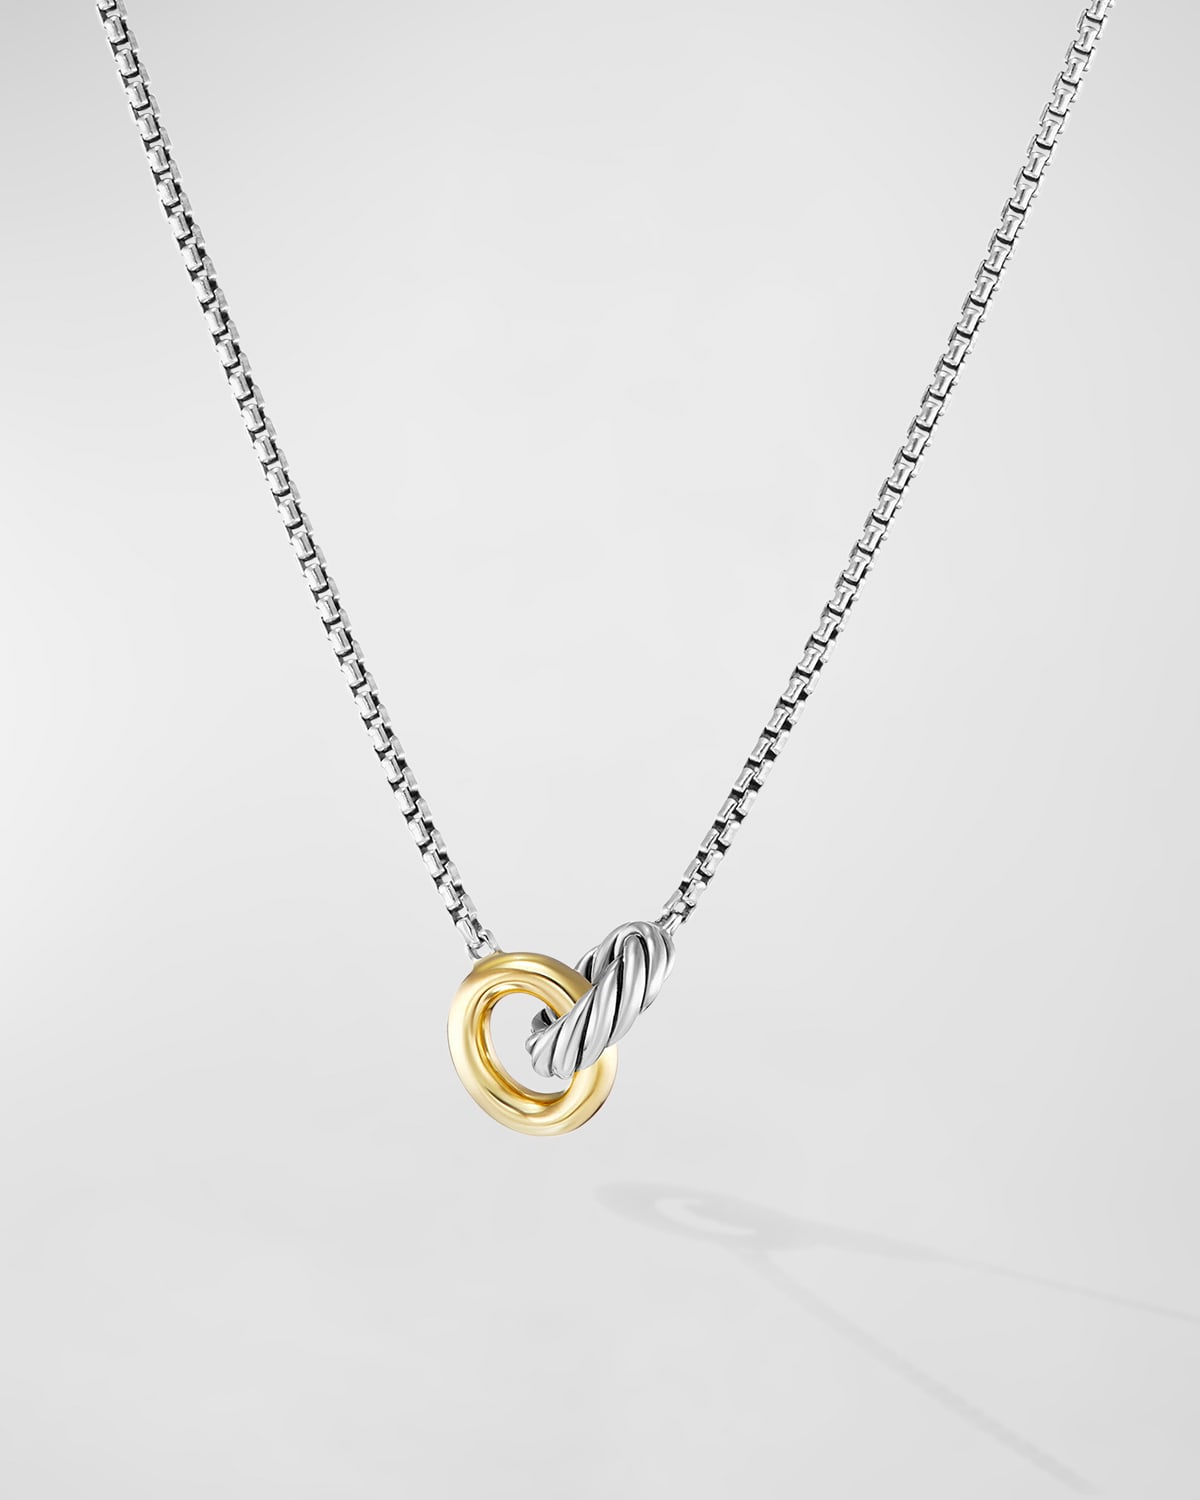 Petite Cable Linked Necklace in Silver and 14K Gold, 15-17"L